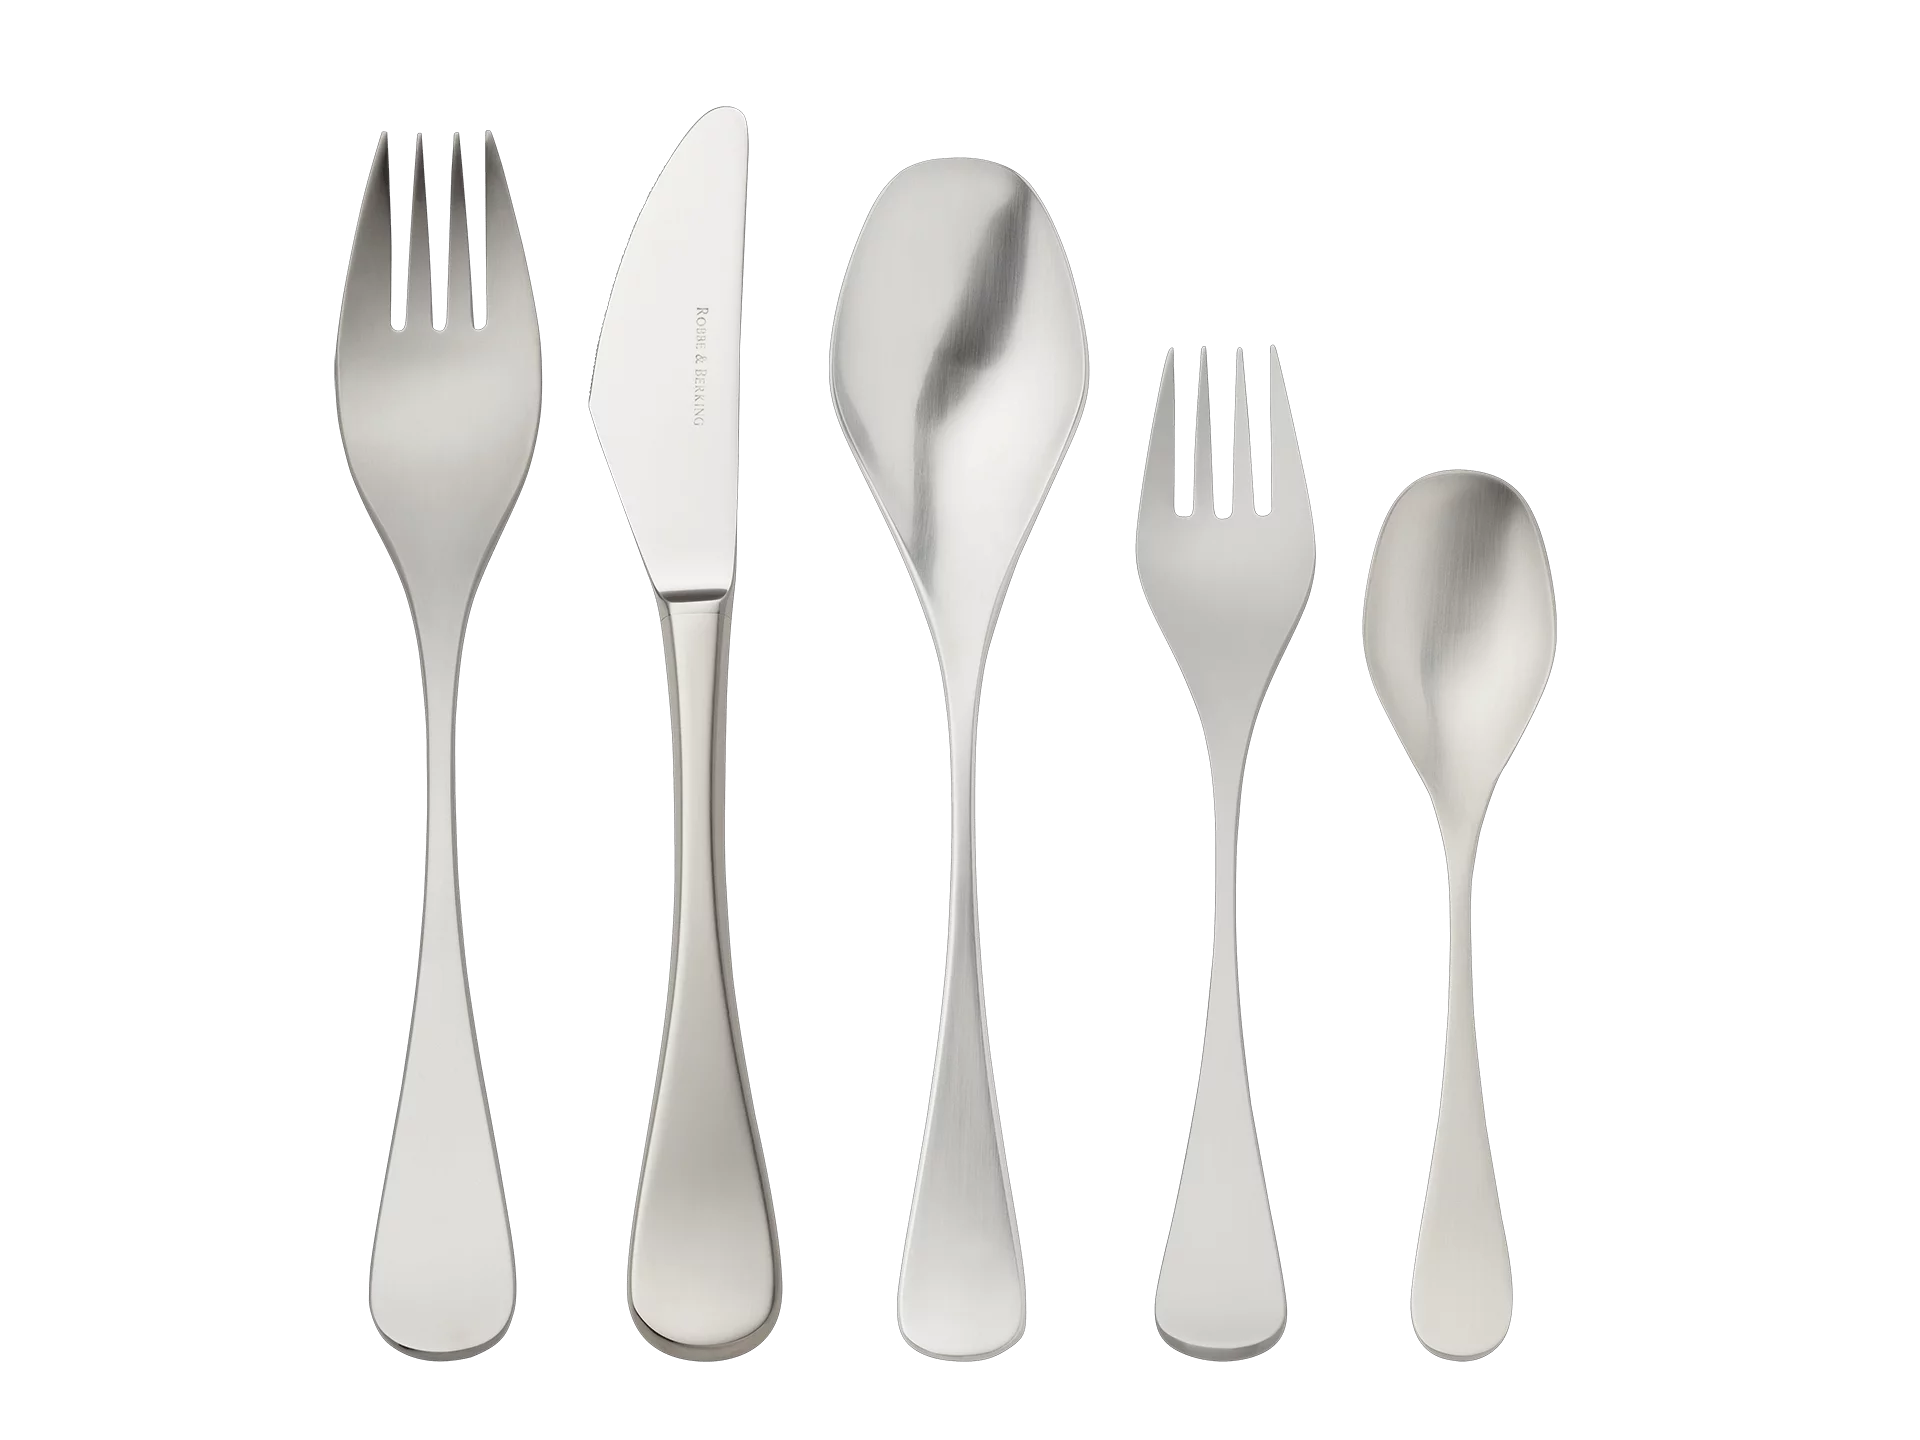 Scandia 5-piece place setting (18/8 stainless steel)